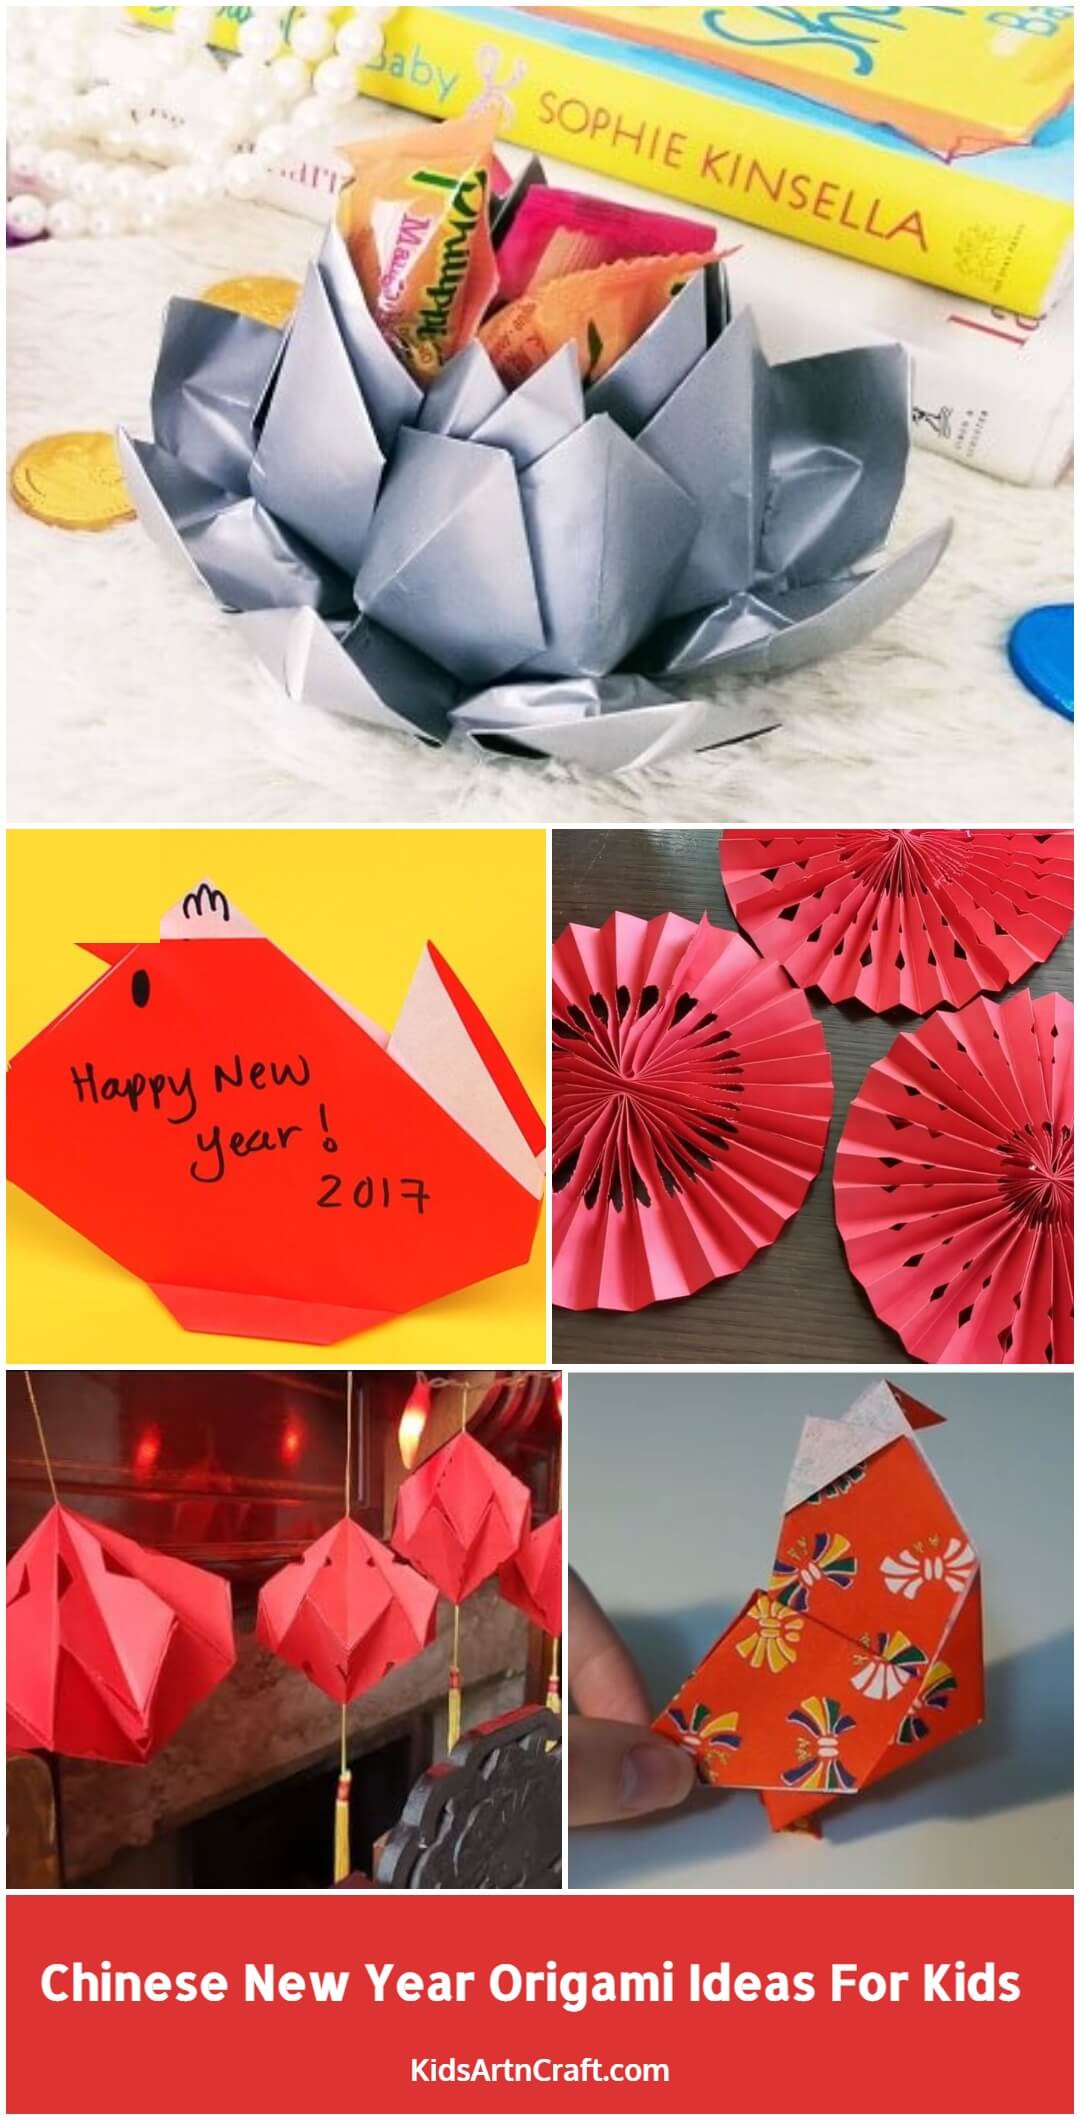 Chinese New Year Origami Ideas That Kids Can Make